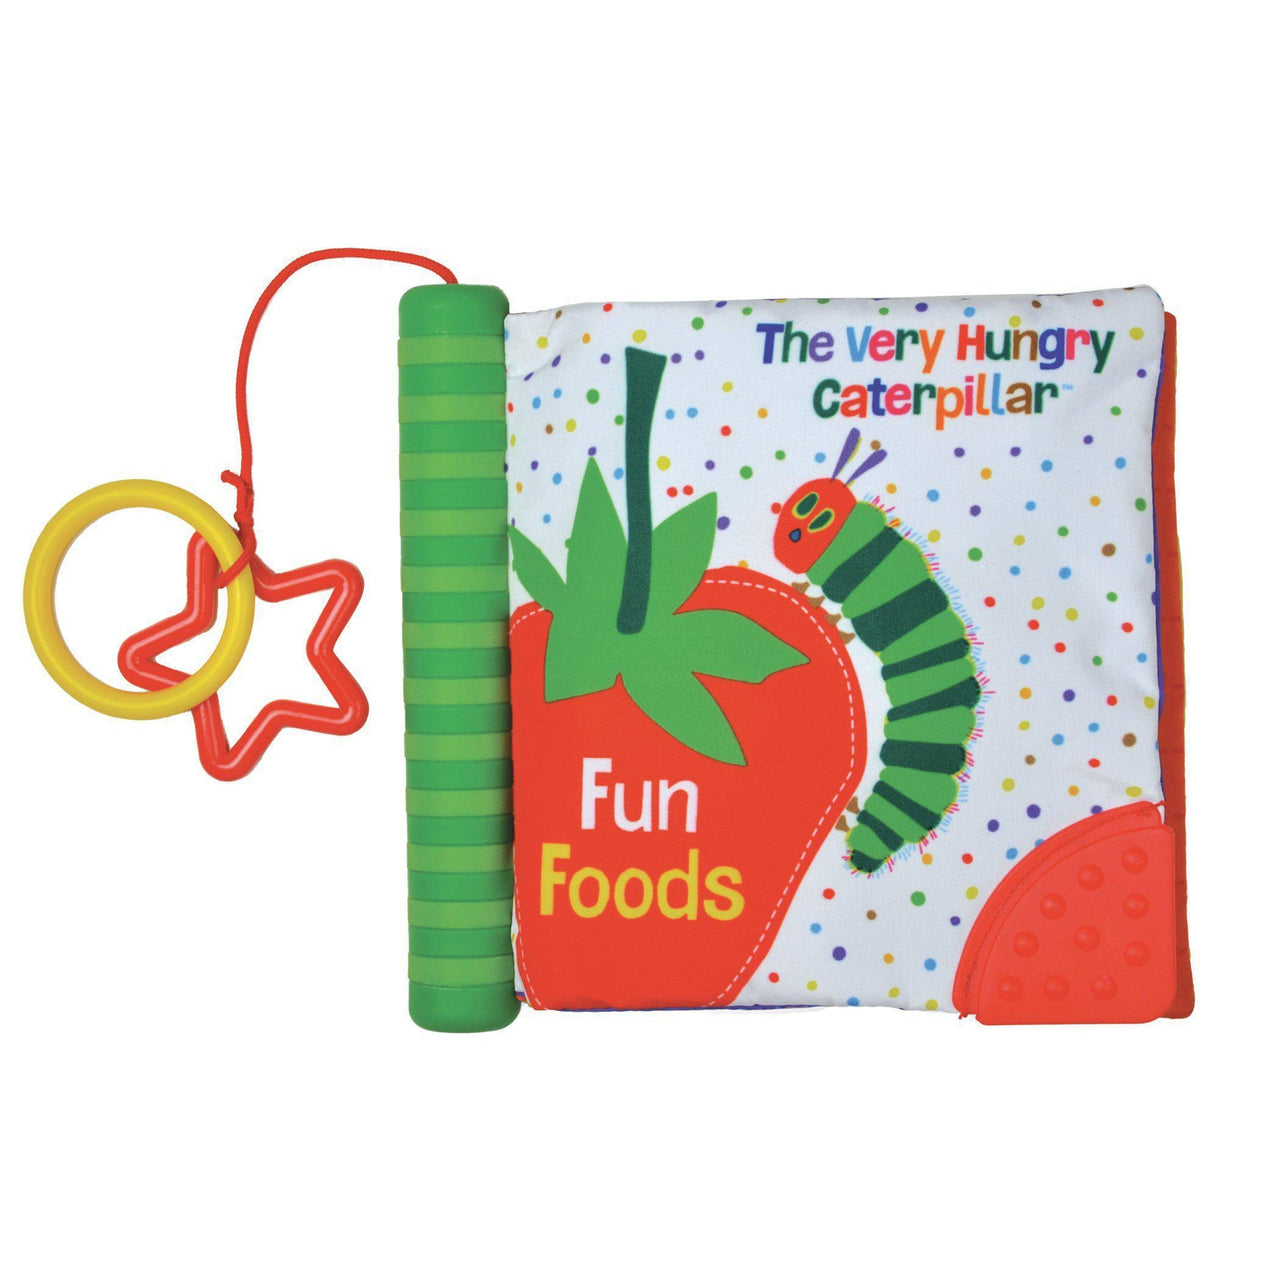 Very Hungry Caterpillar™ "Fun Foods" On-The-Go Soft Book